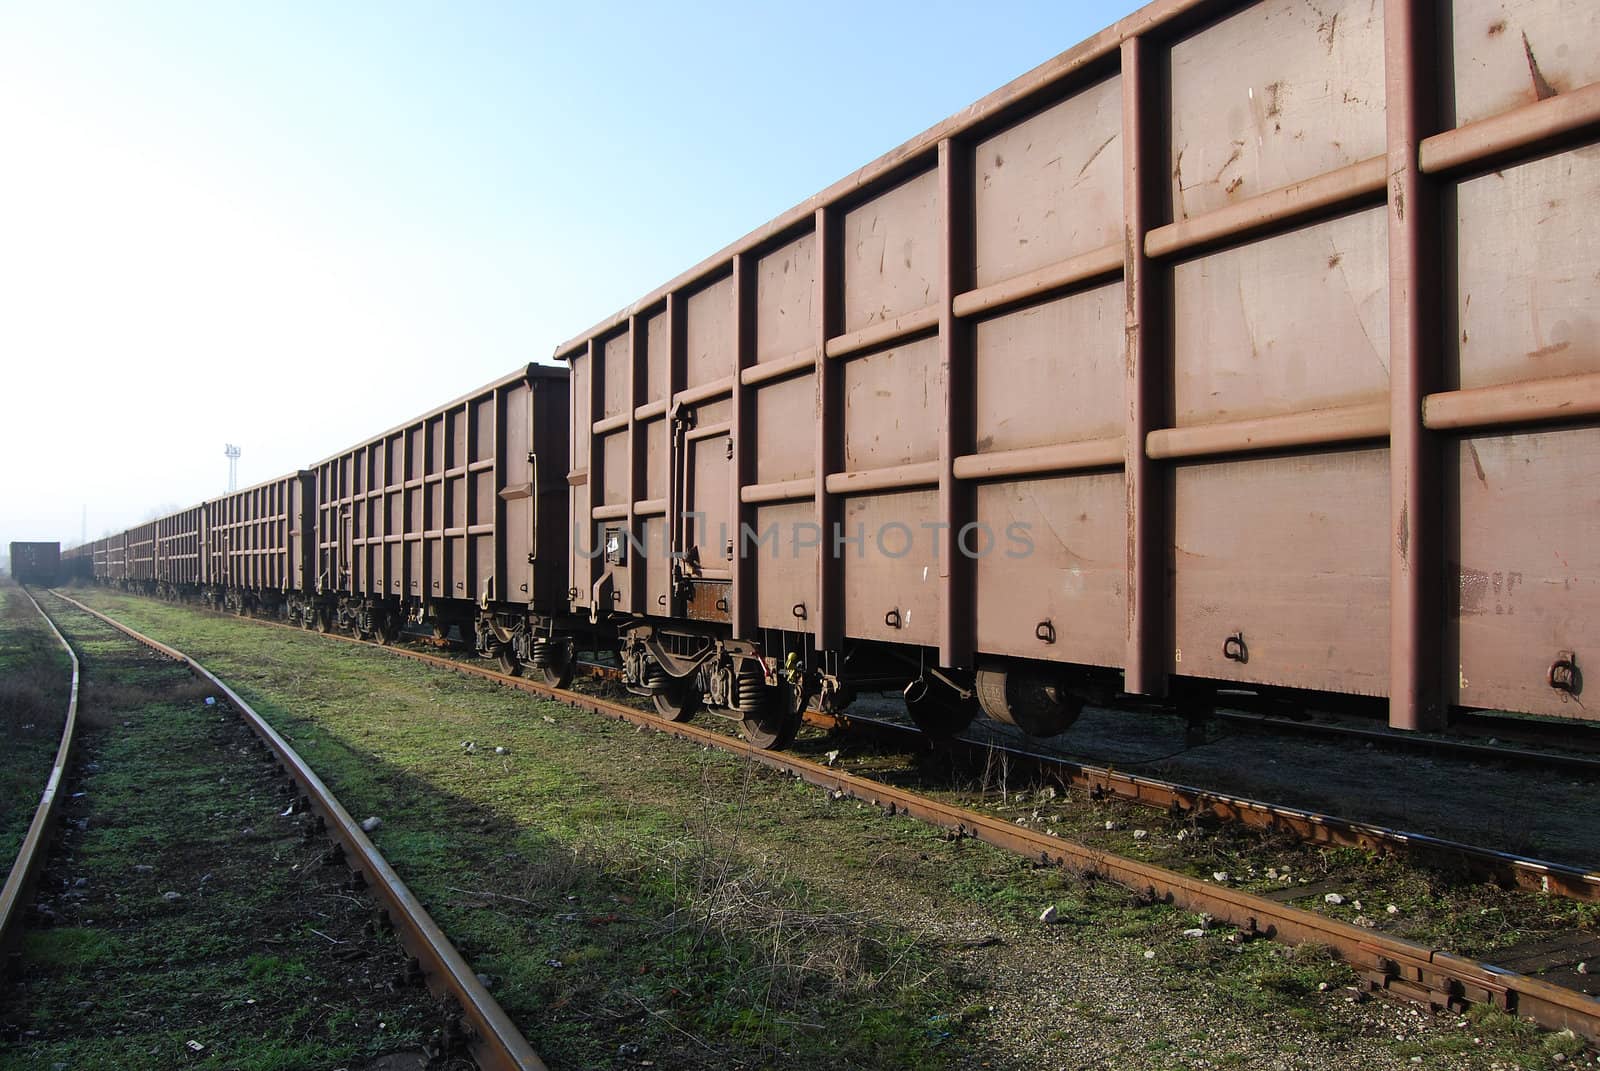 Railway freight wagons by varbenov